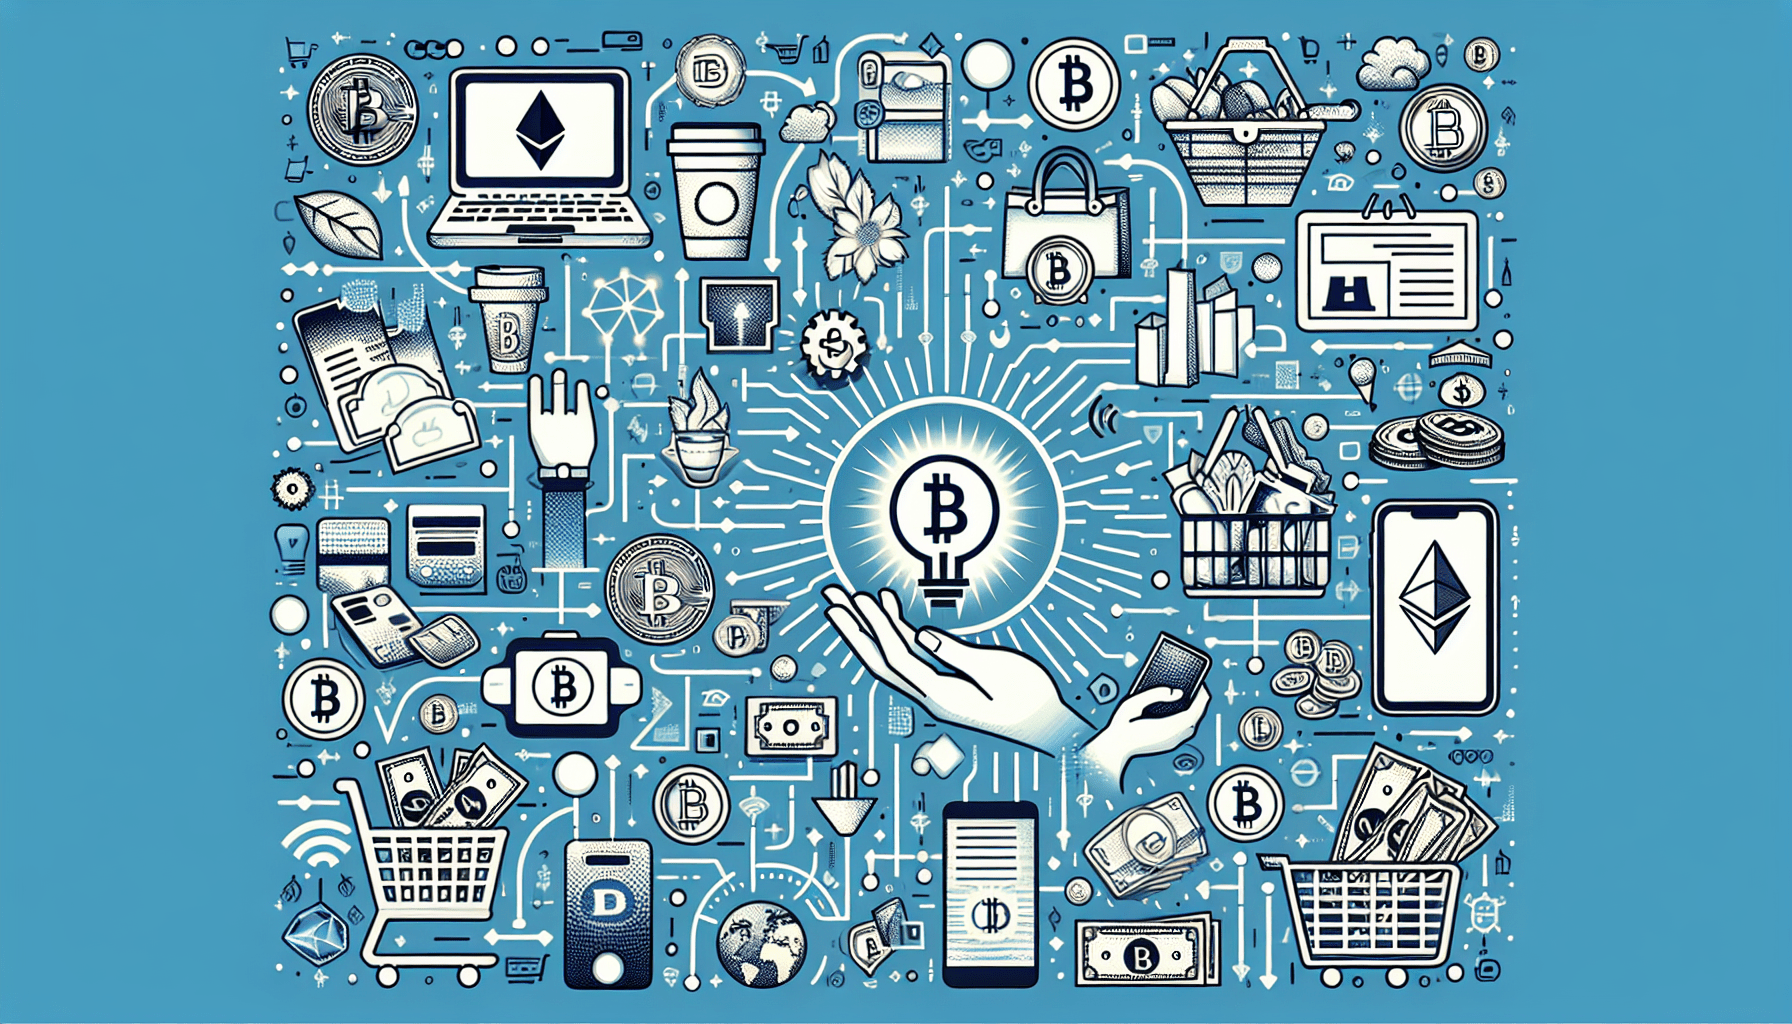 What Is The Outlook For The Use Of Cryptocurrencies In Everyday Transactions?